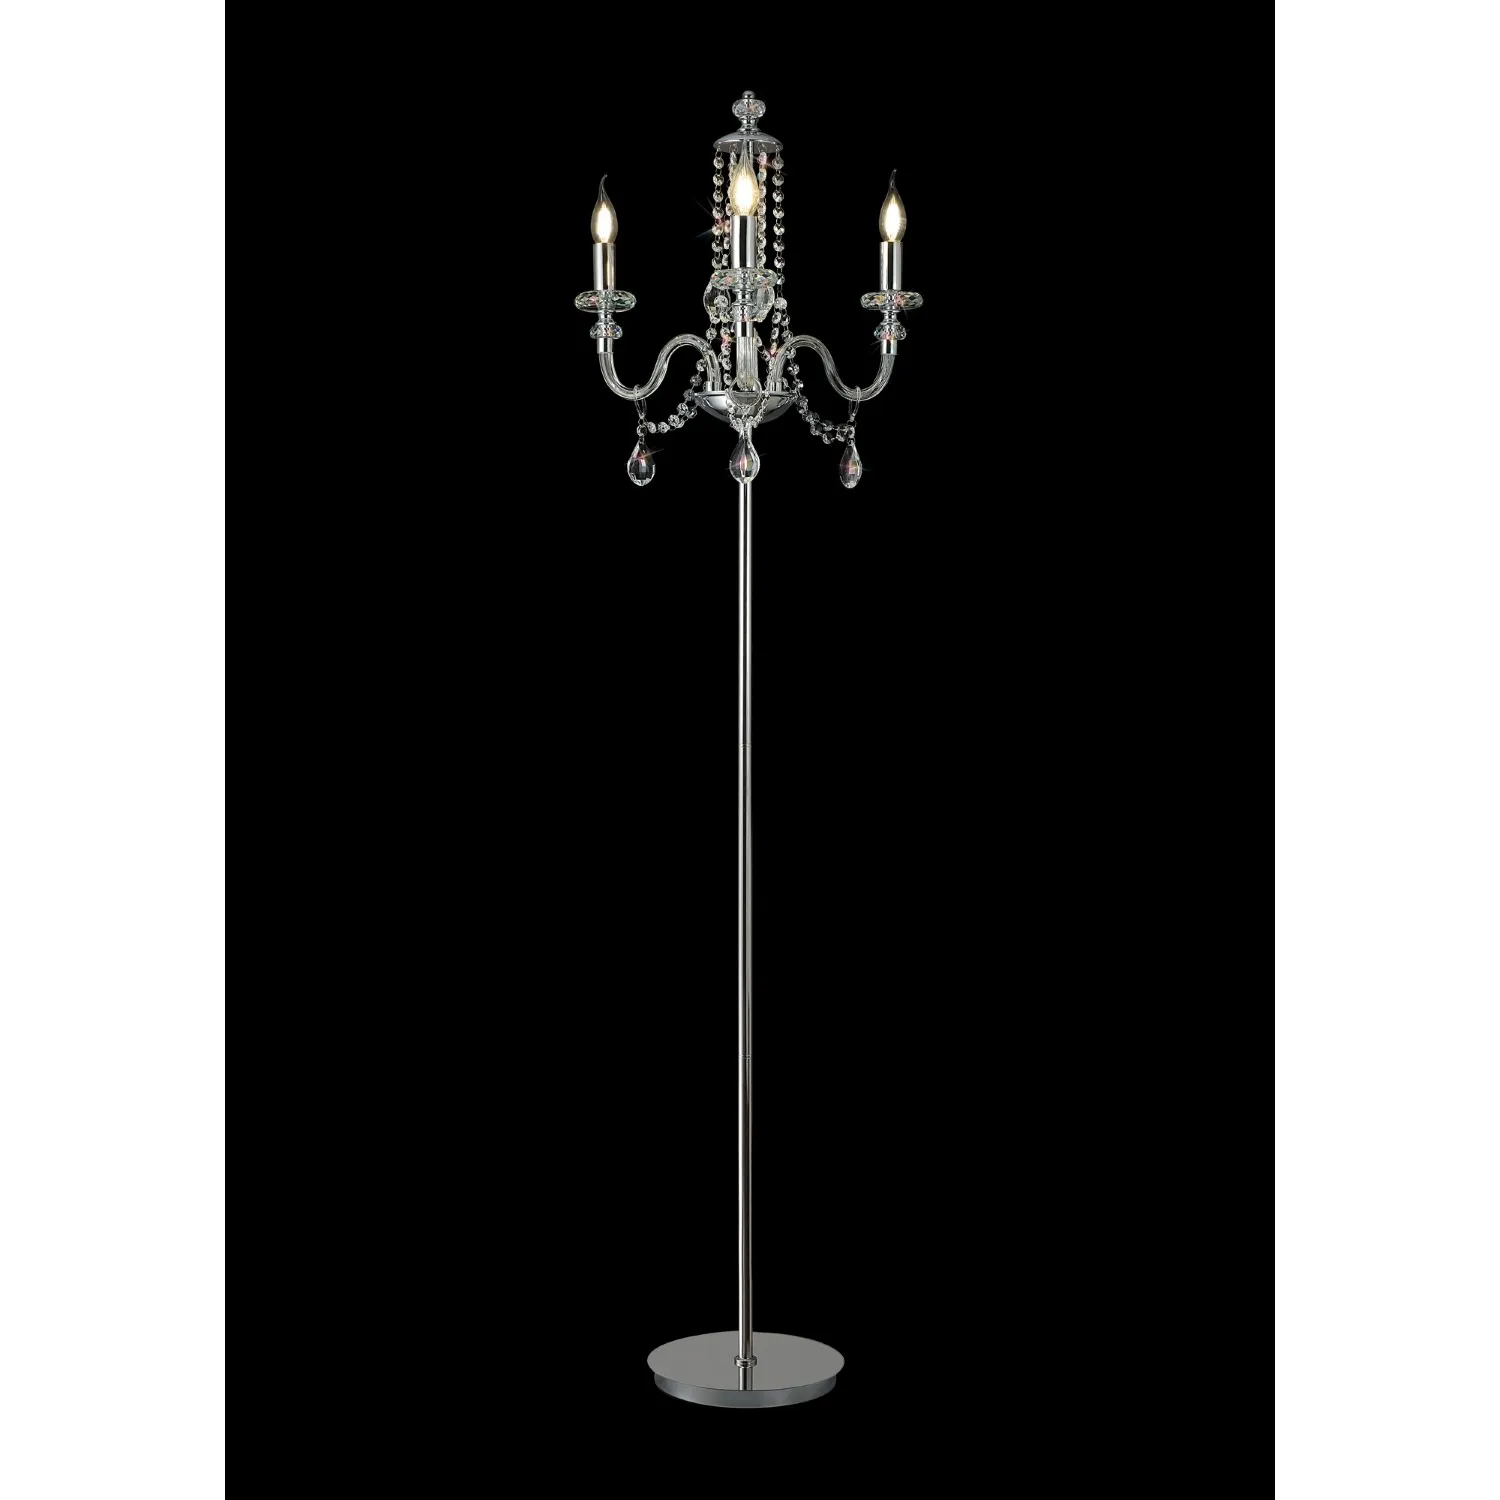 Wimbledon Floor Lamp, 3 Light E14, Polished Chrome Clear Glass Crystal, (ITEM REQUIRES CONSTRUCTION CONNECTION)